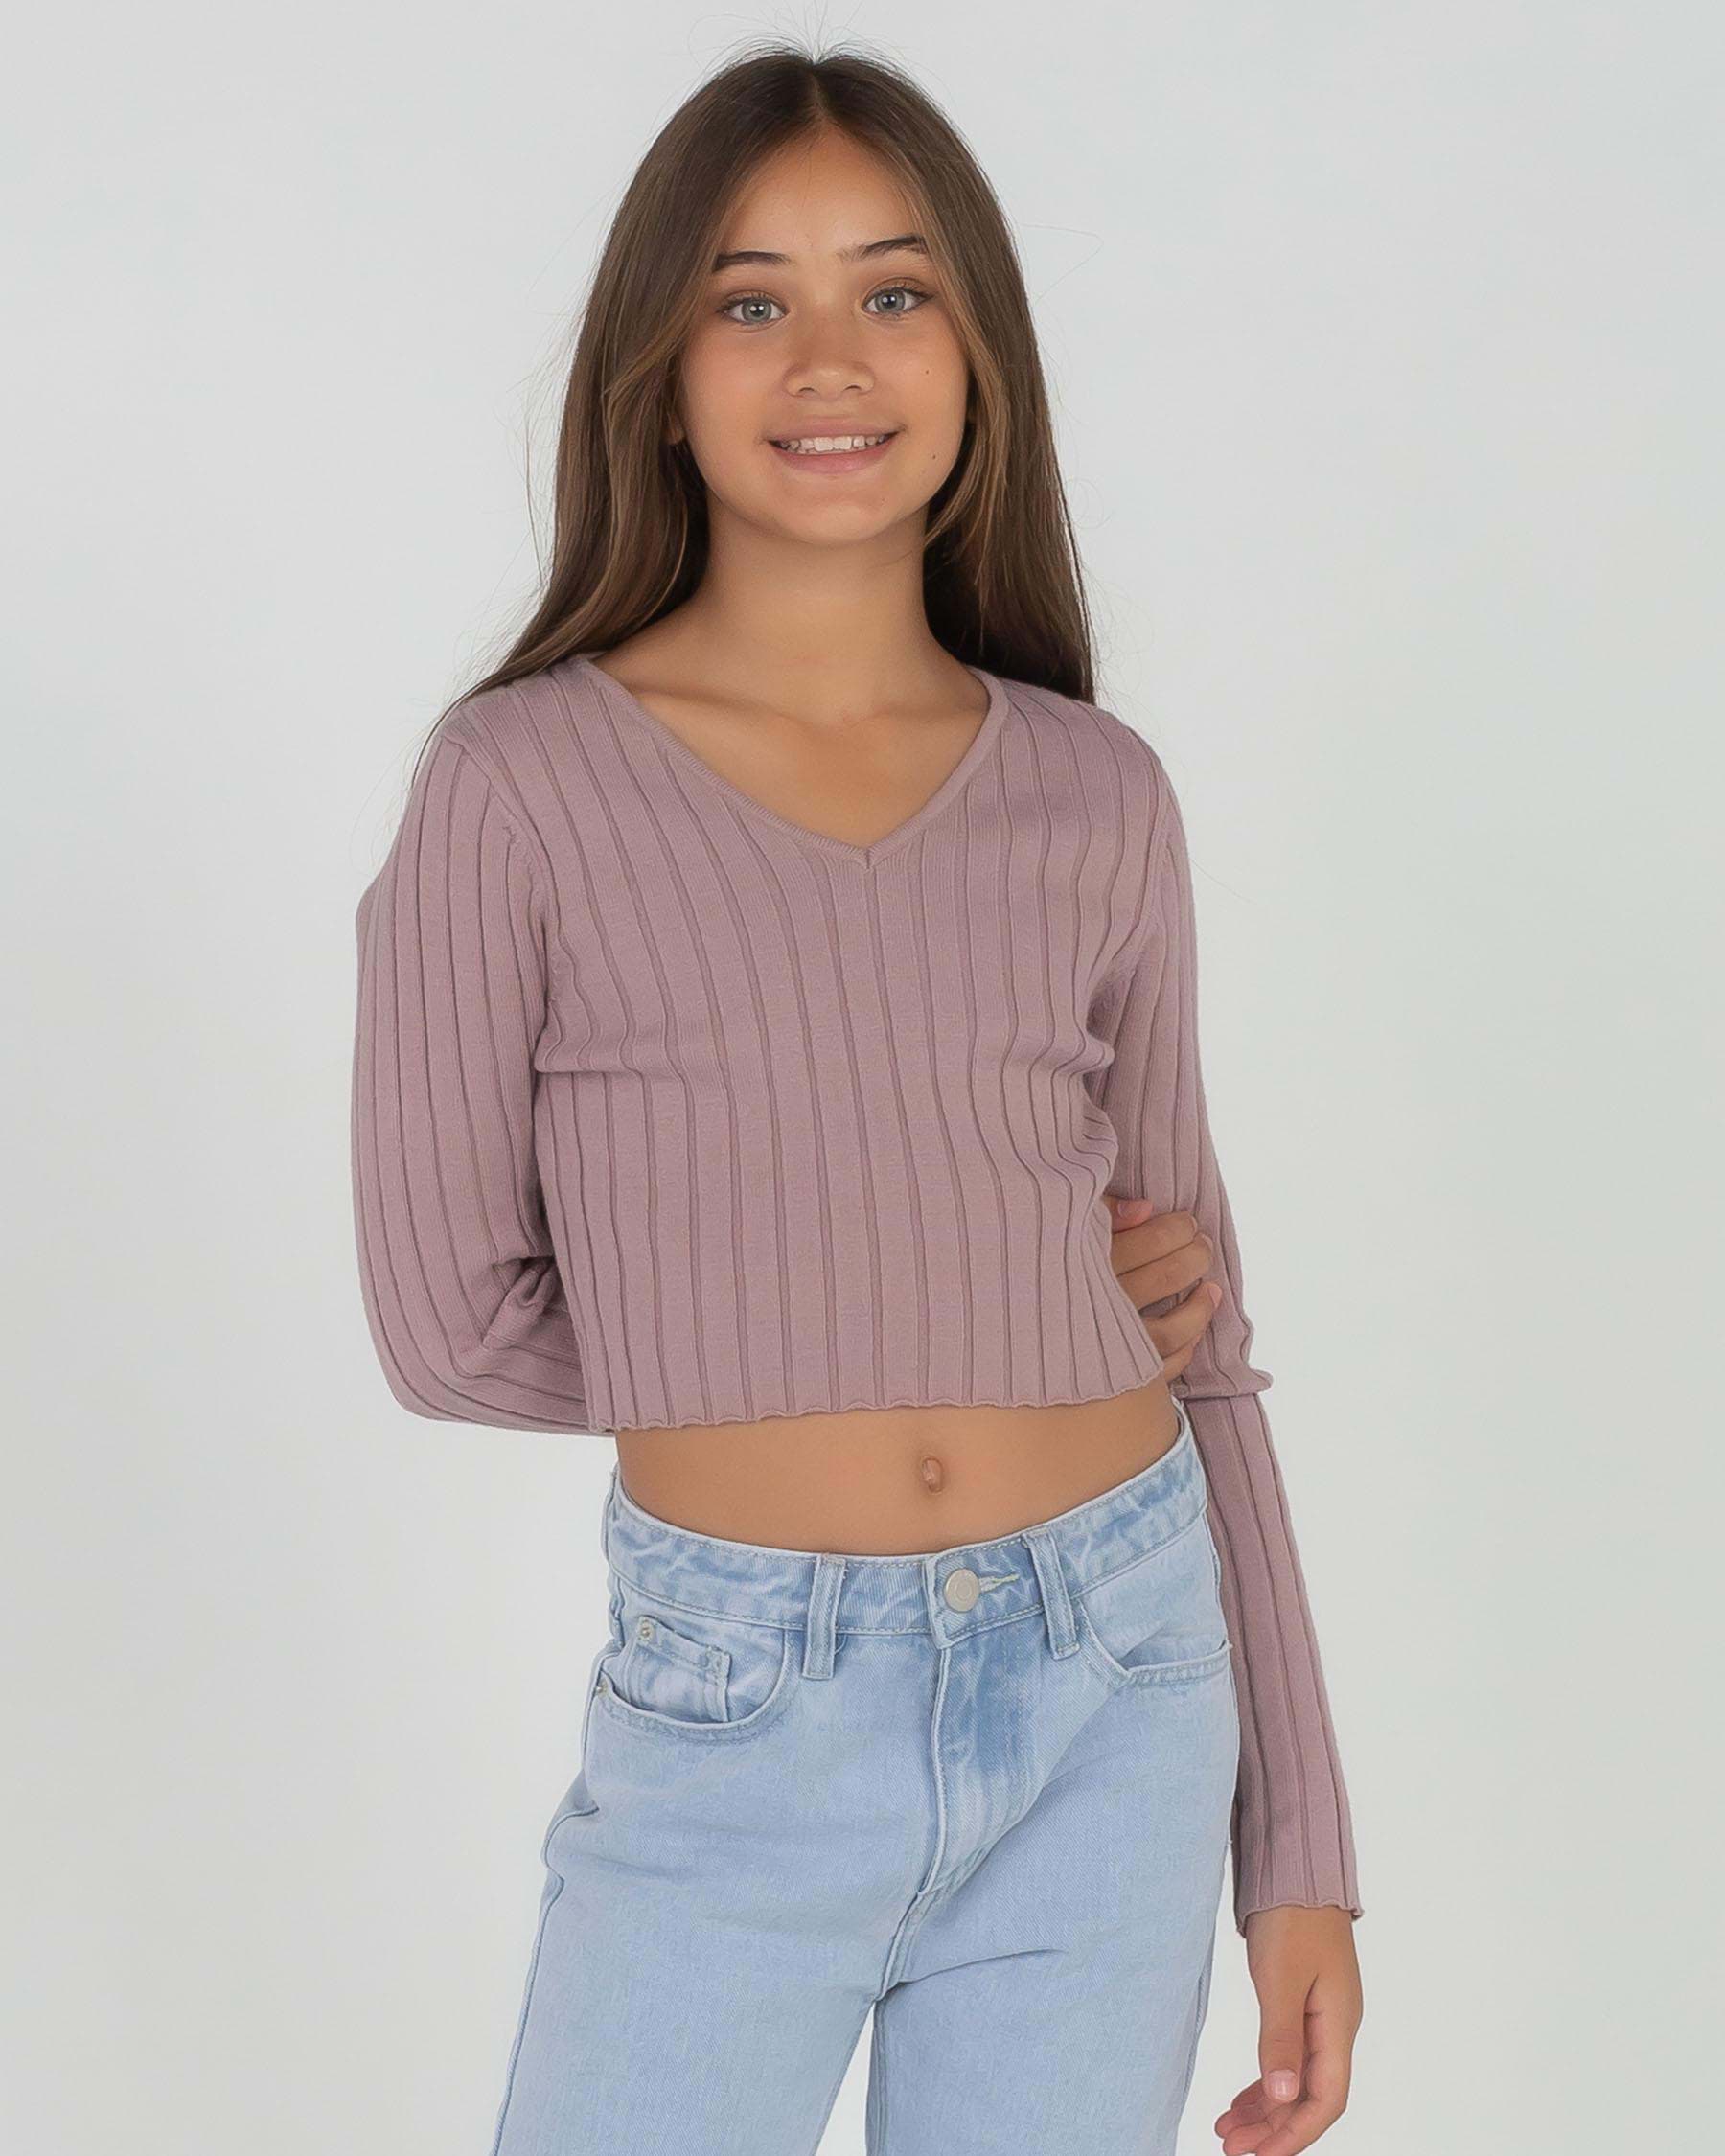 Mooloola Girls' Sanja Knit Top In Dusty Mauve - Fast Shipping & Easy ...